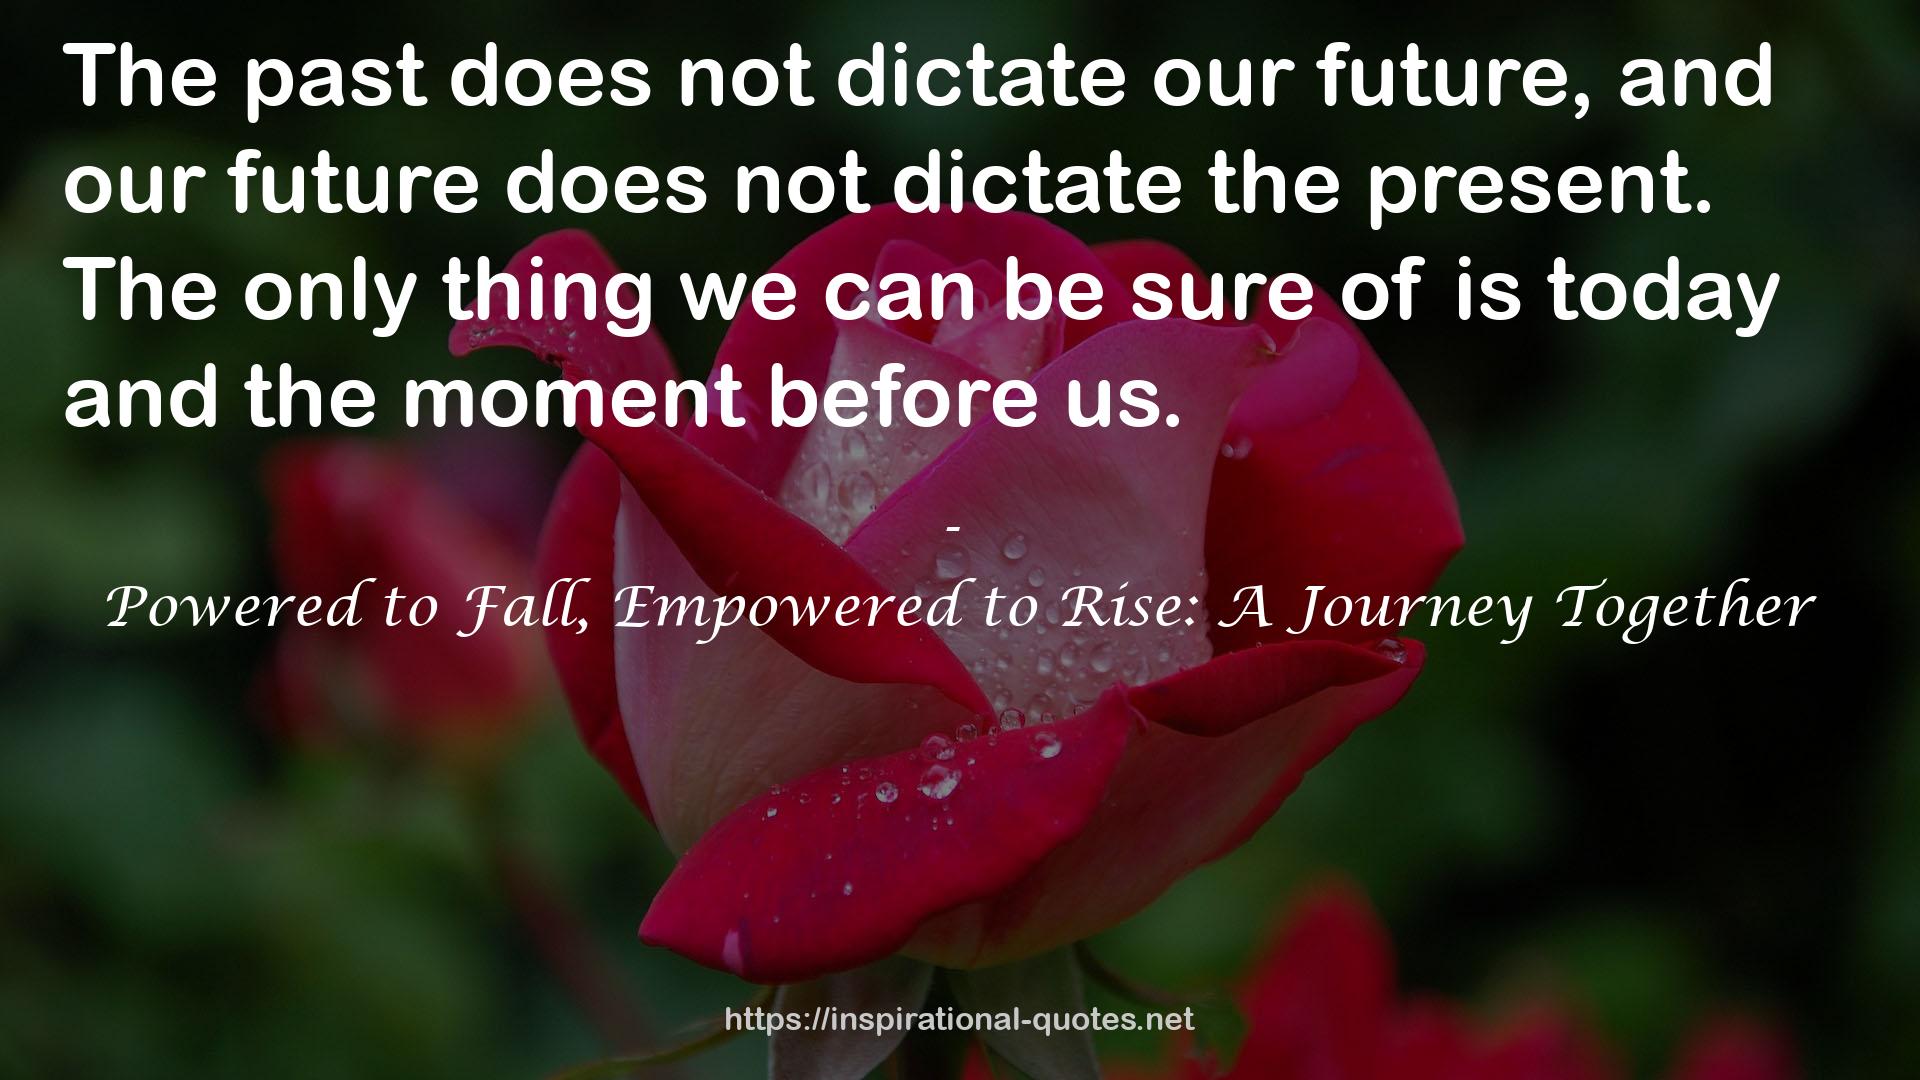 Powered to Fall, Empowered to Rise: A Journey Together QUOTES